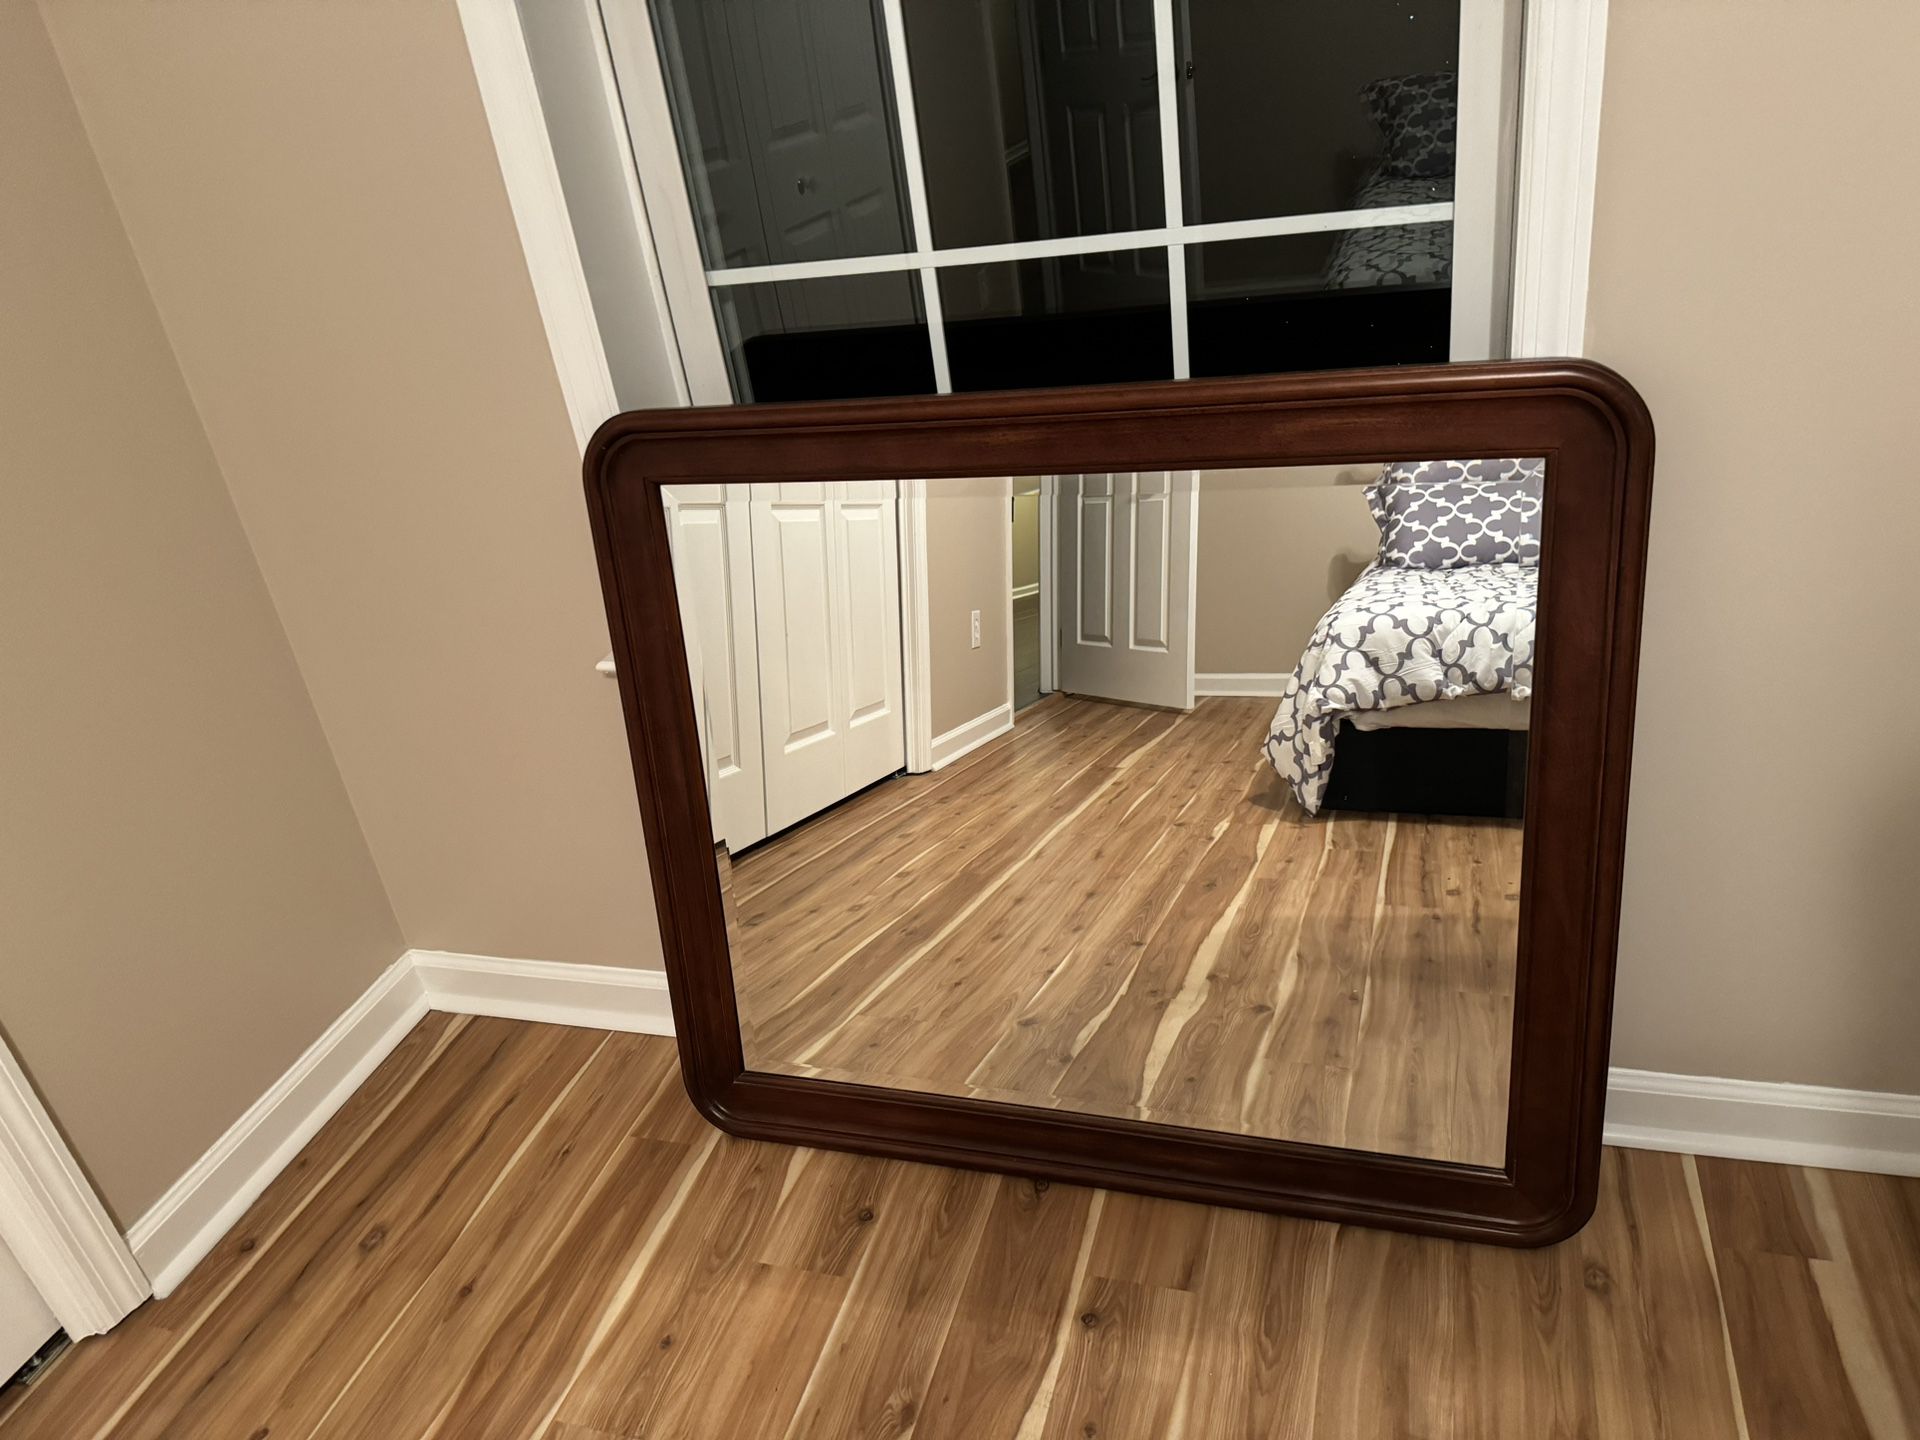 Large Dresser Or Wall Hang Mirror